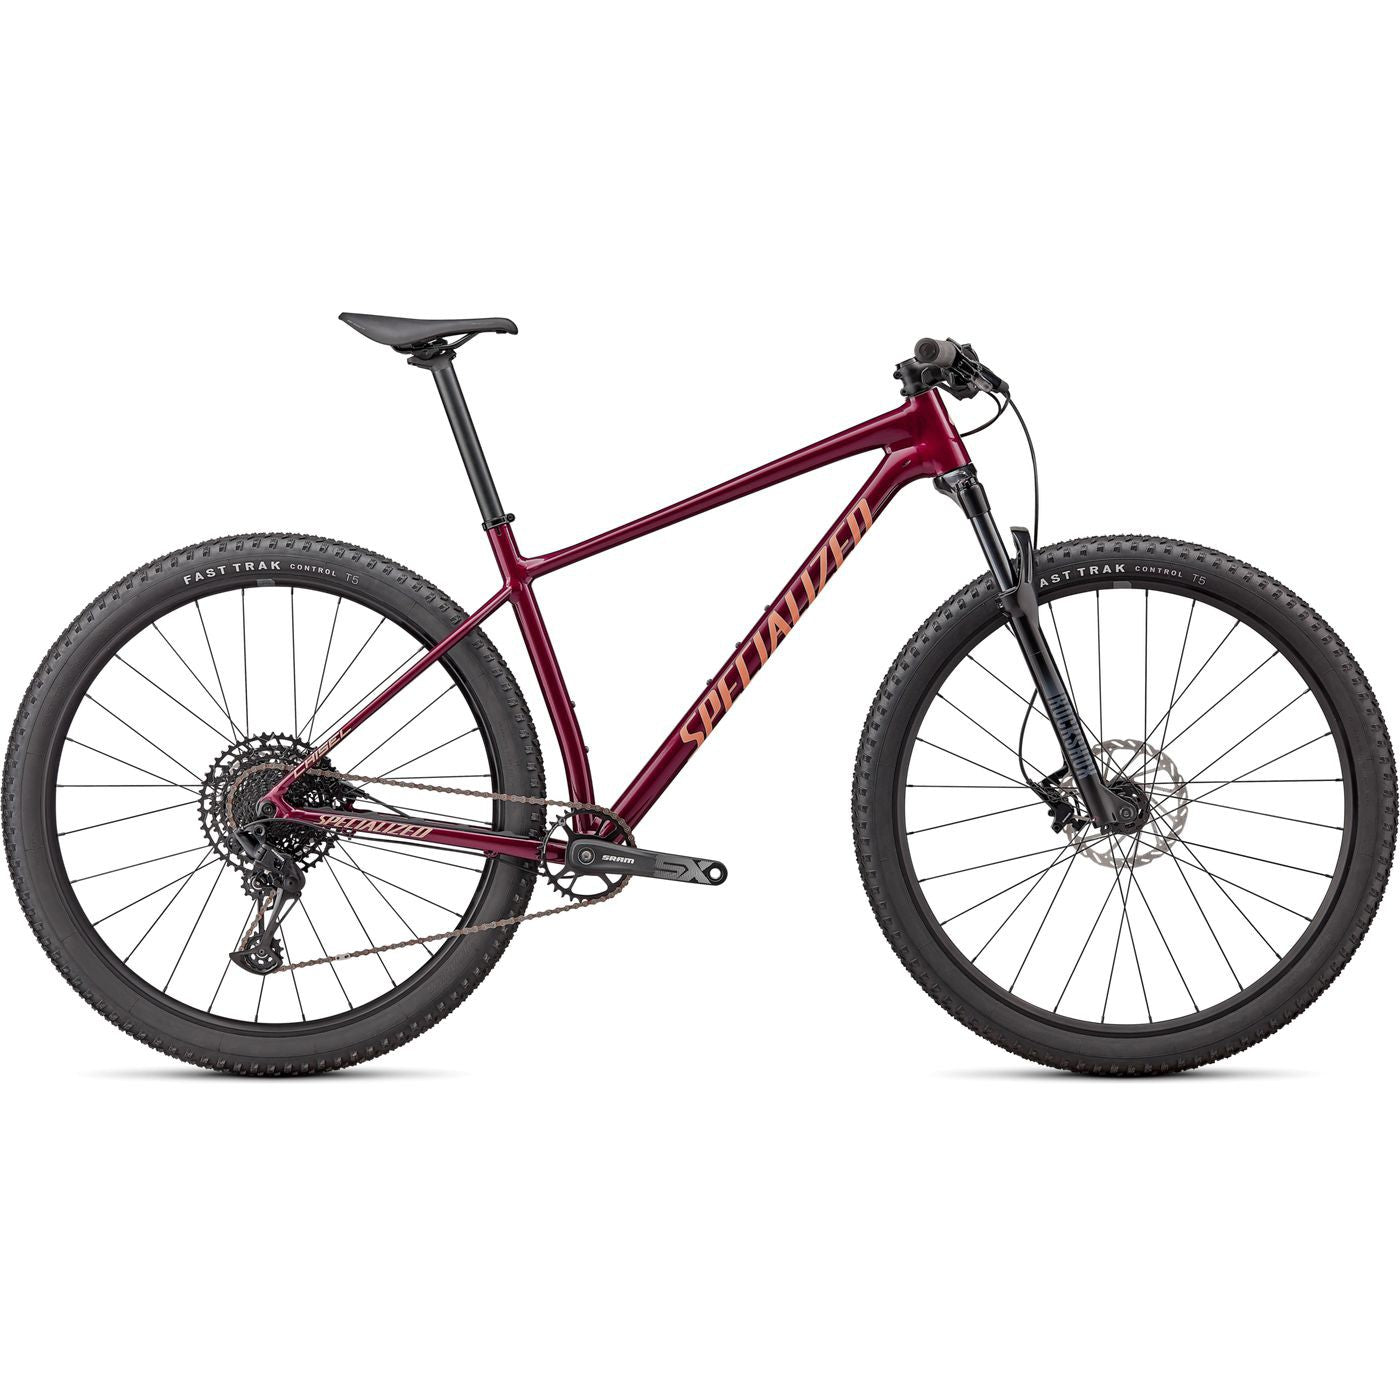 Specialized Chisel Hardtail 29" Mountain Bike - Bikes - Bicycle Warehouse